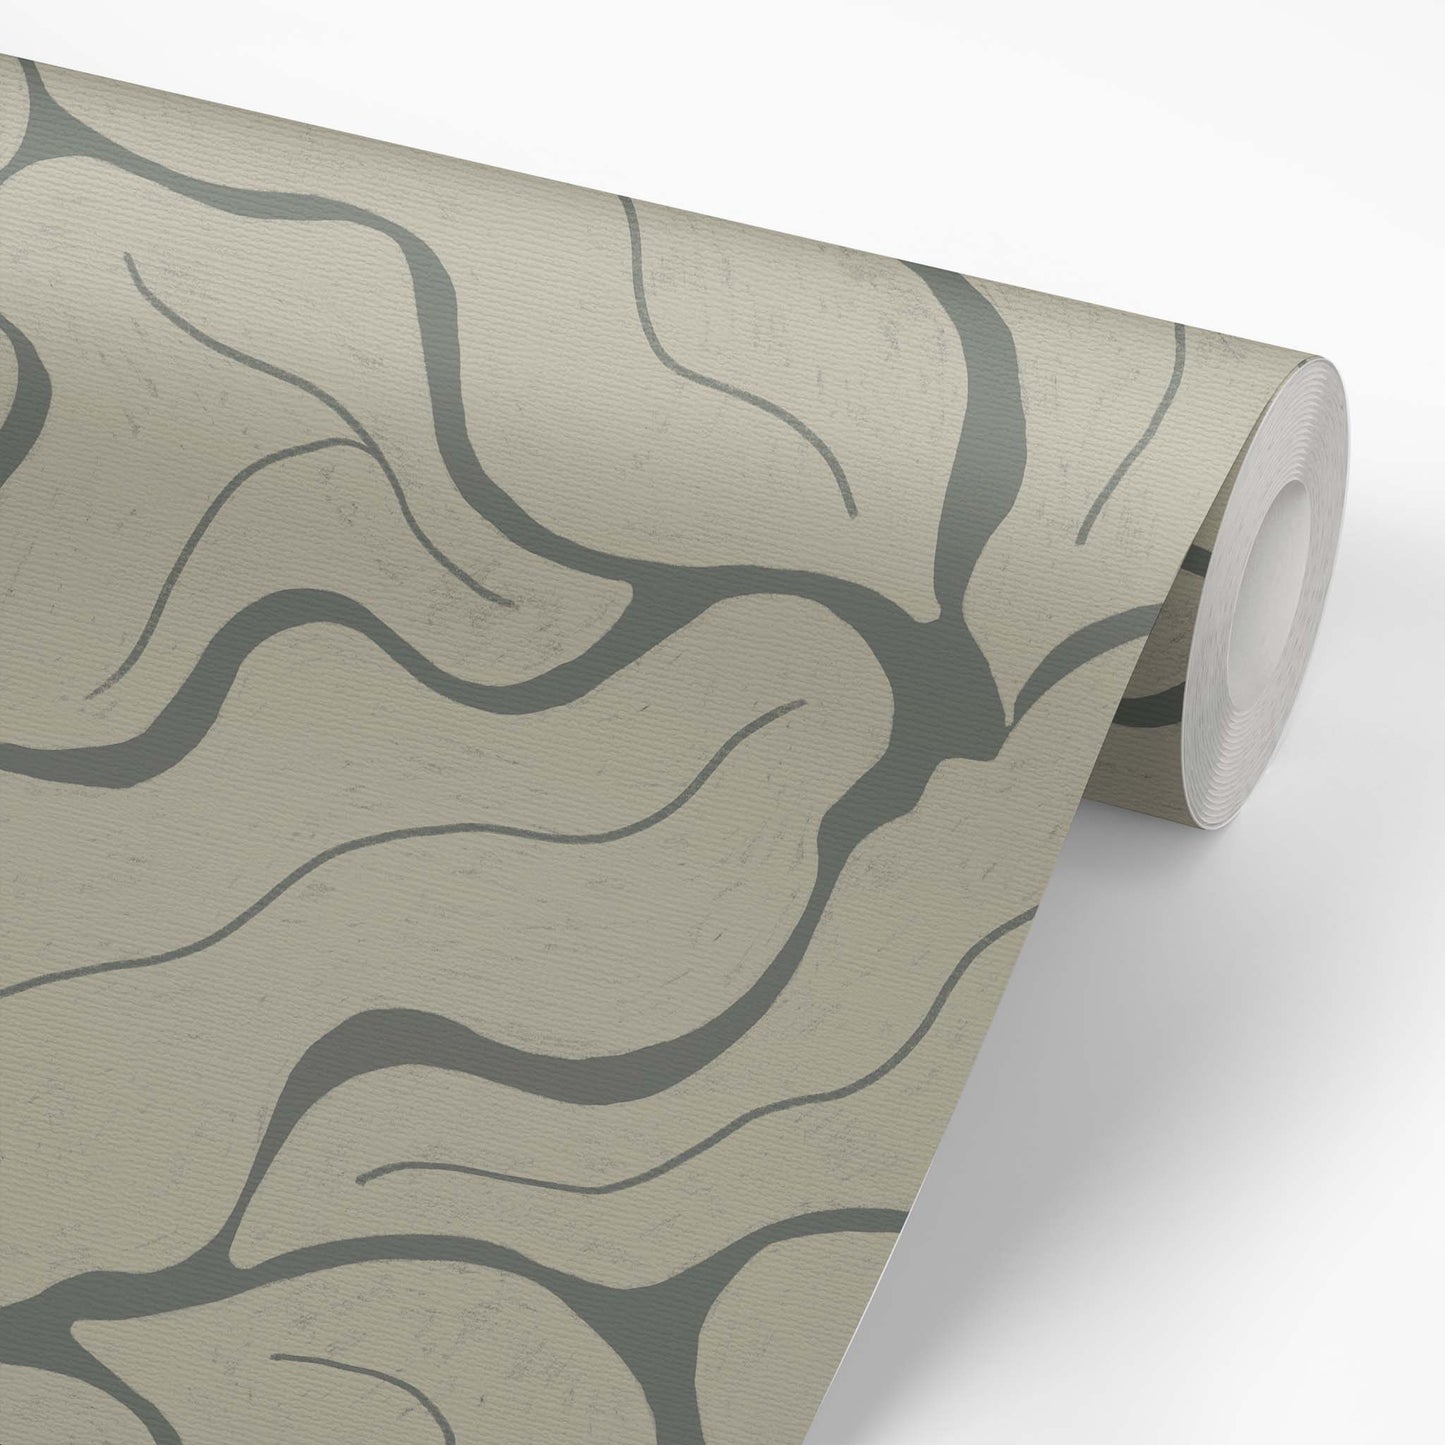 Wallpaper roll featuring our Modern Leaves Wallpaper in Sage by artist Brenda Bird for Ayara